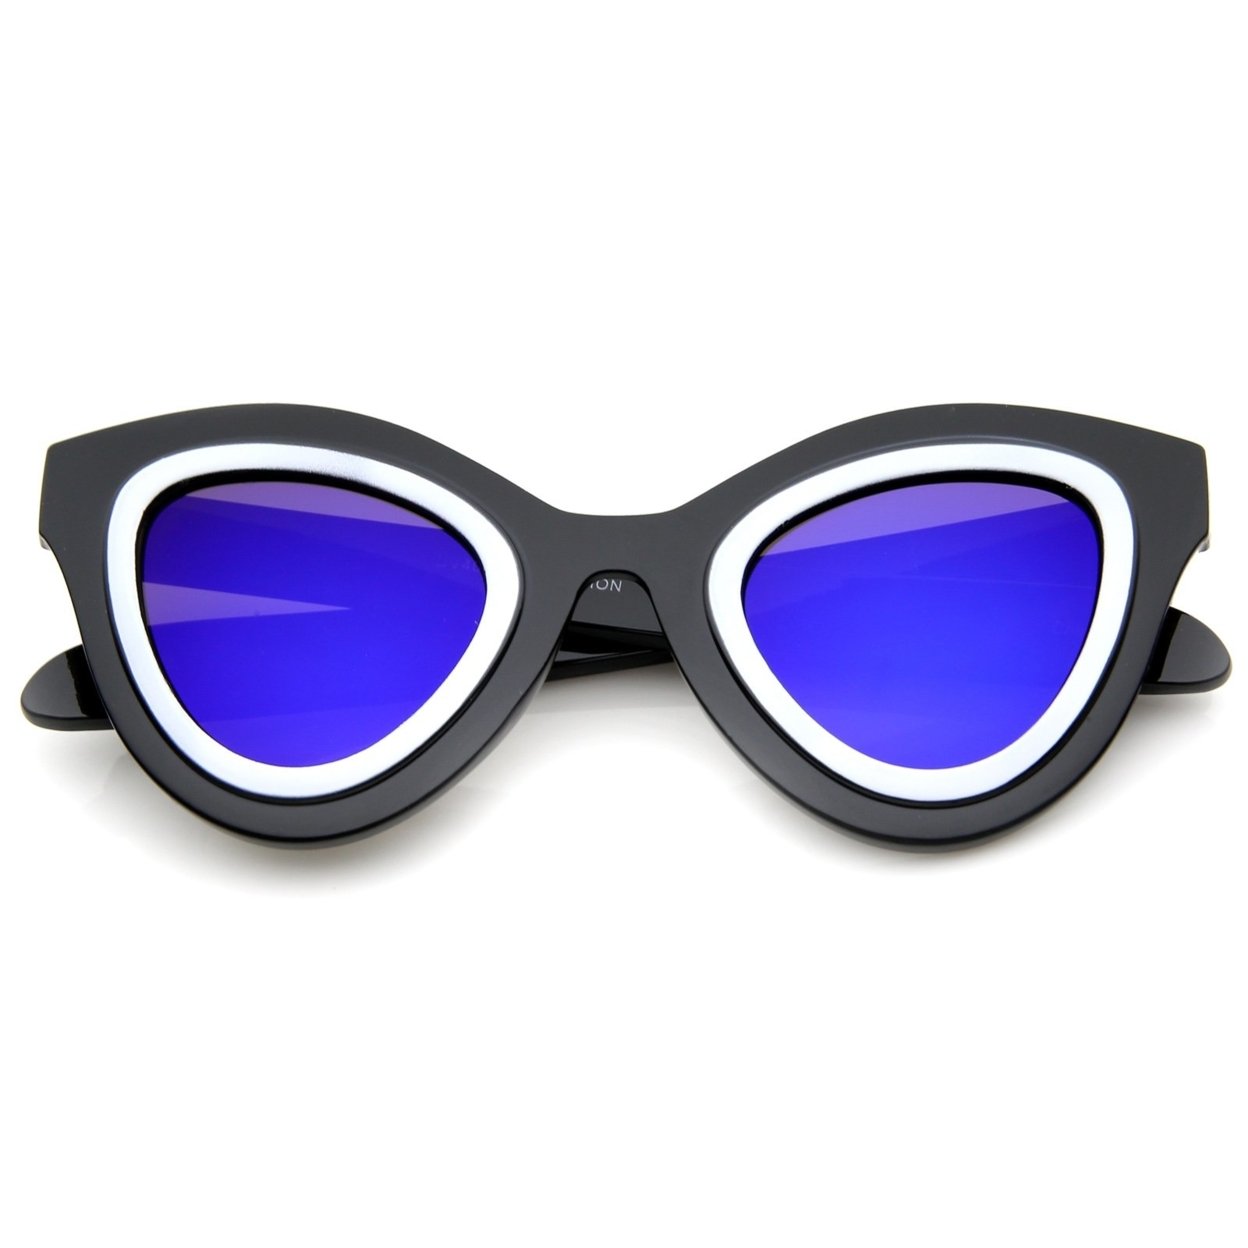 Womens High Fashion Two-Toned Mirrored Cat Eye Sunglasses 42mm - Clear-White / Blue Mirror